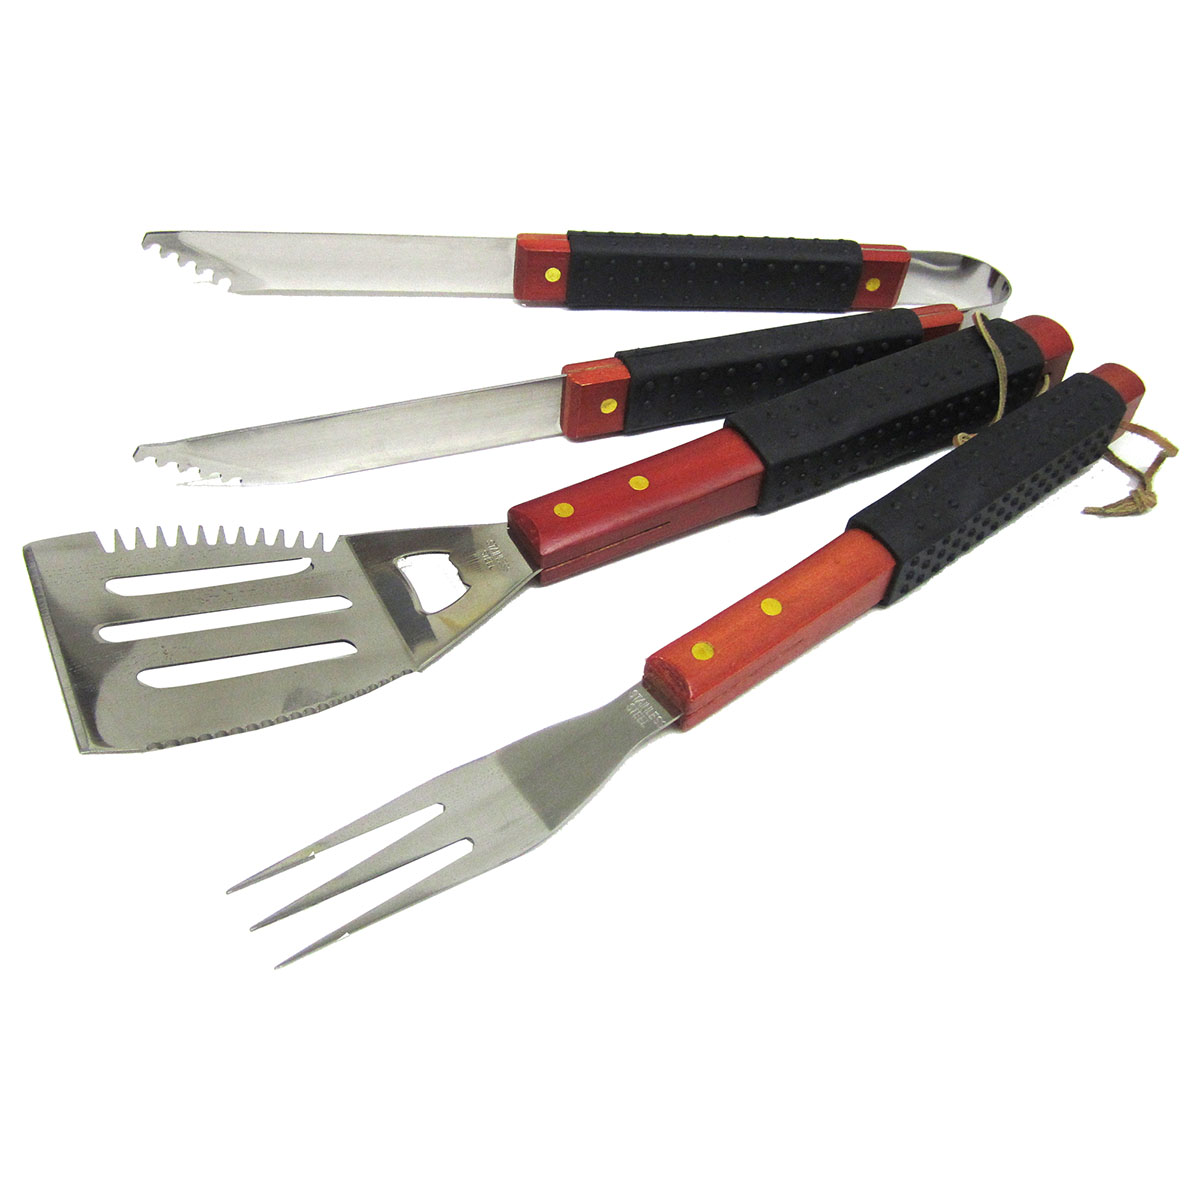 Picture of 21 Century B64A19 Wood Toolset - 3 Piece